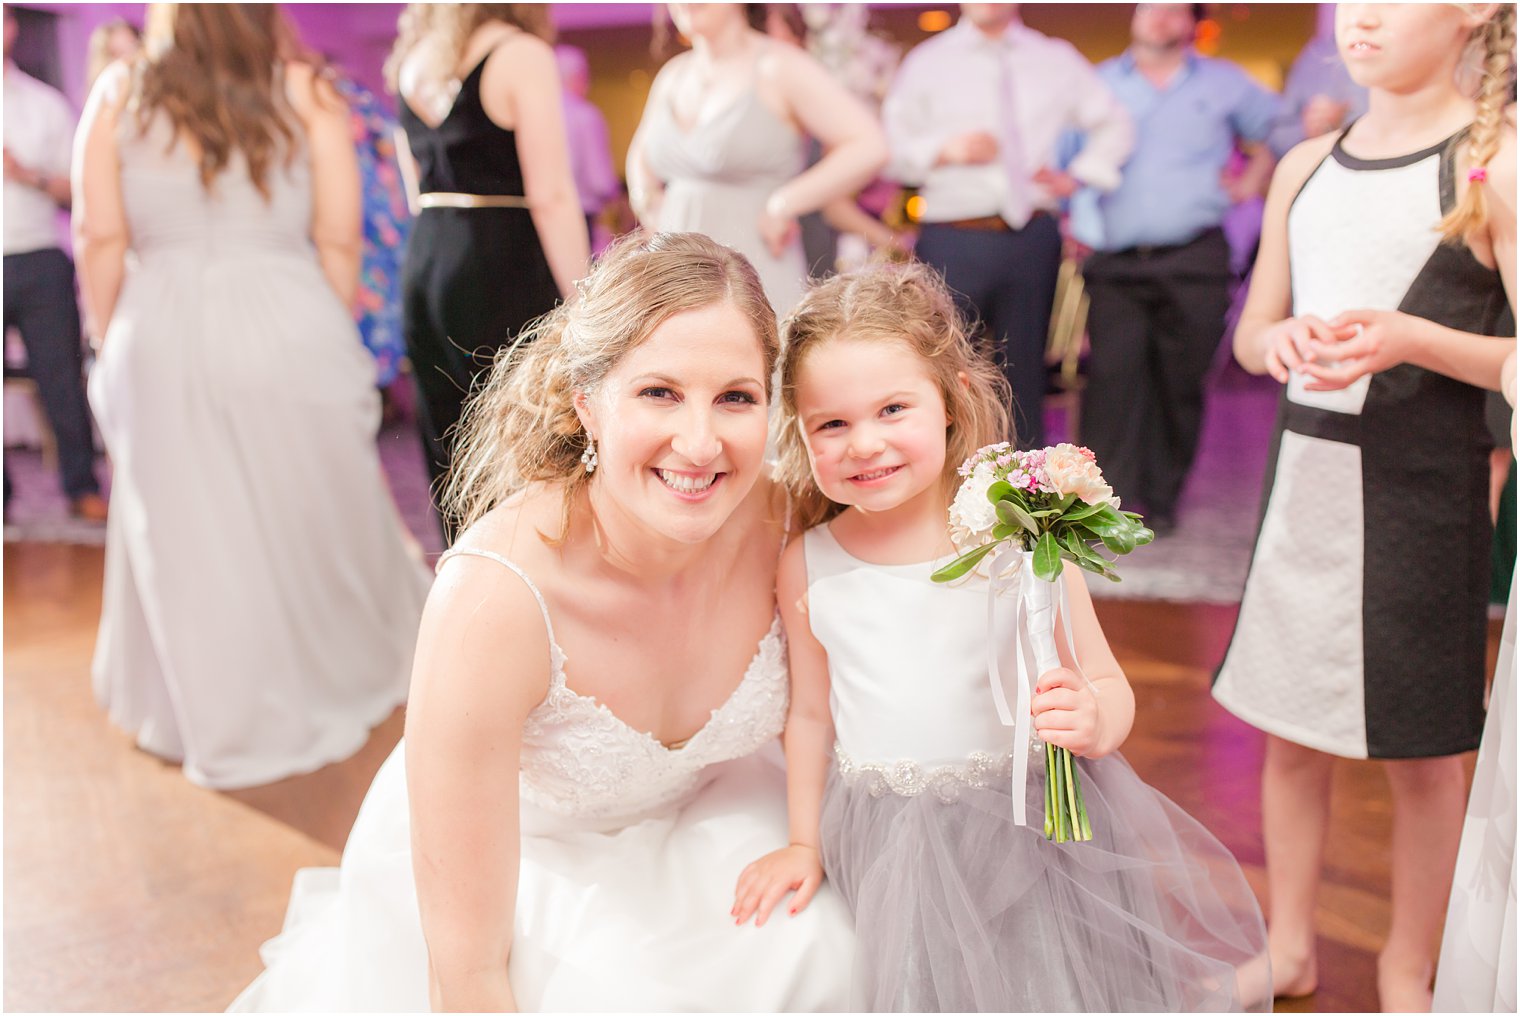 Flower girl catching bouquet during wedding reception at The Mill at Lakeside Manor in Spring Lake NJ